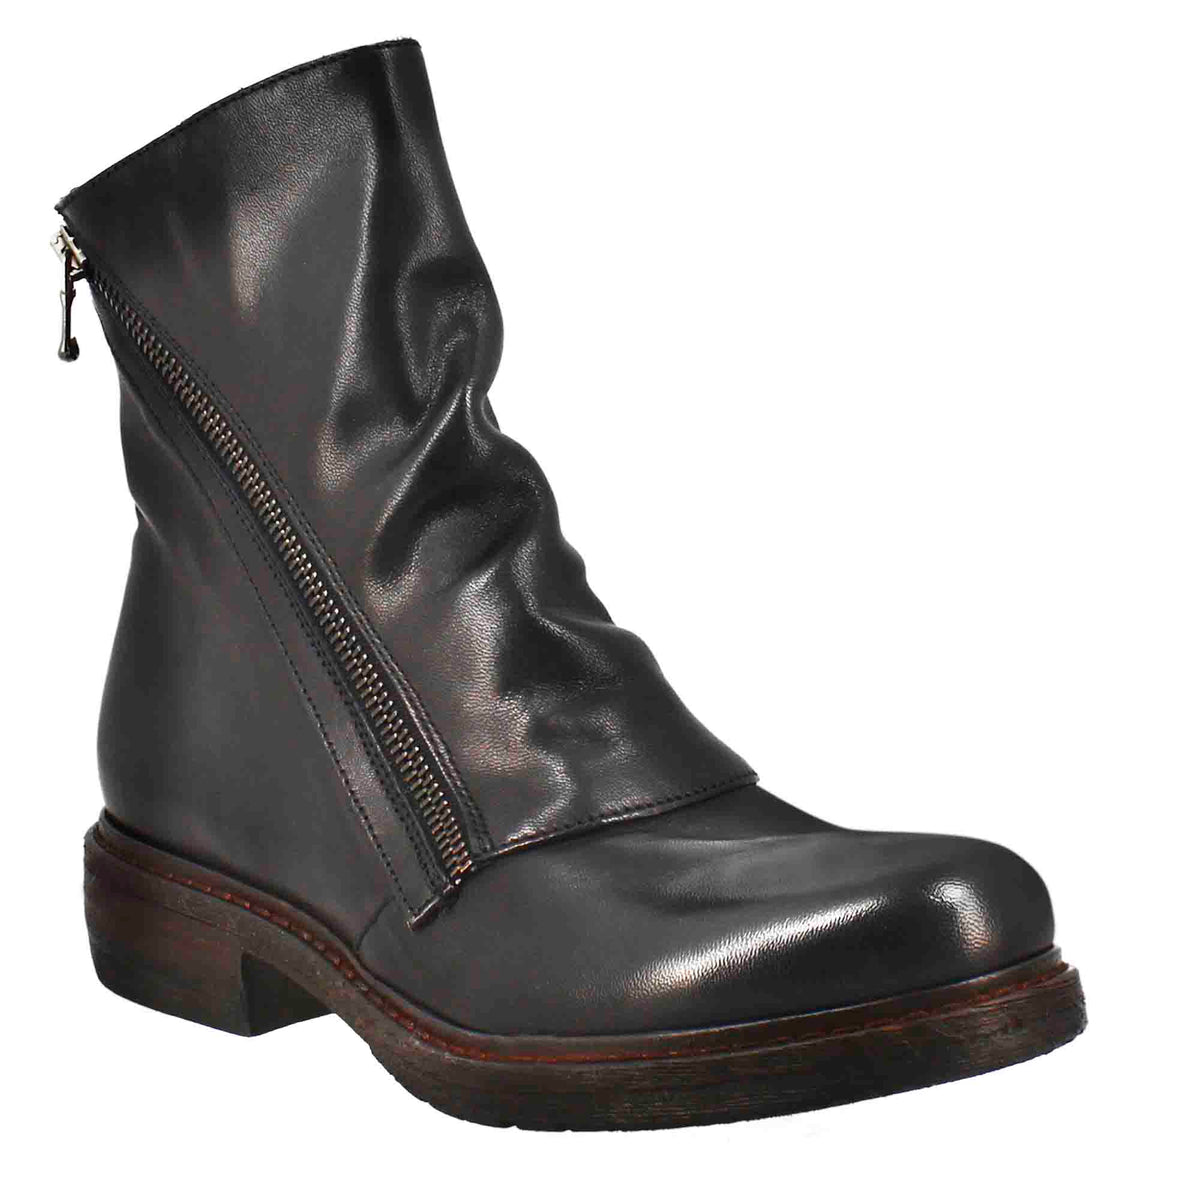 Paupa women's ankle boot in black washed leather with diagonal zip